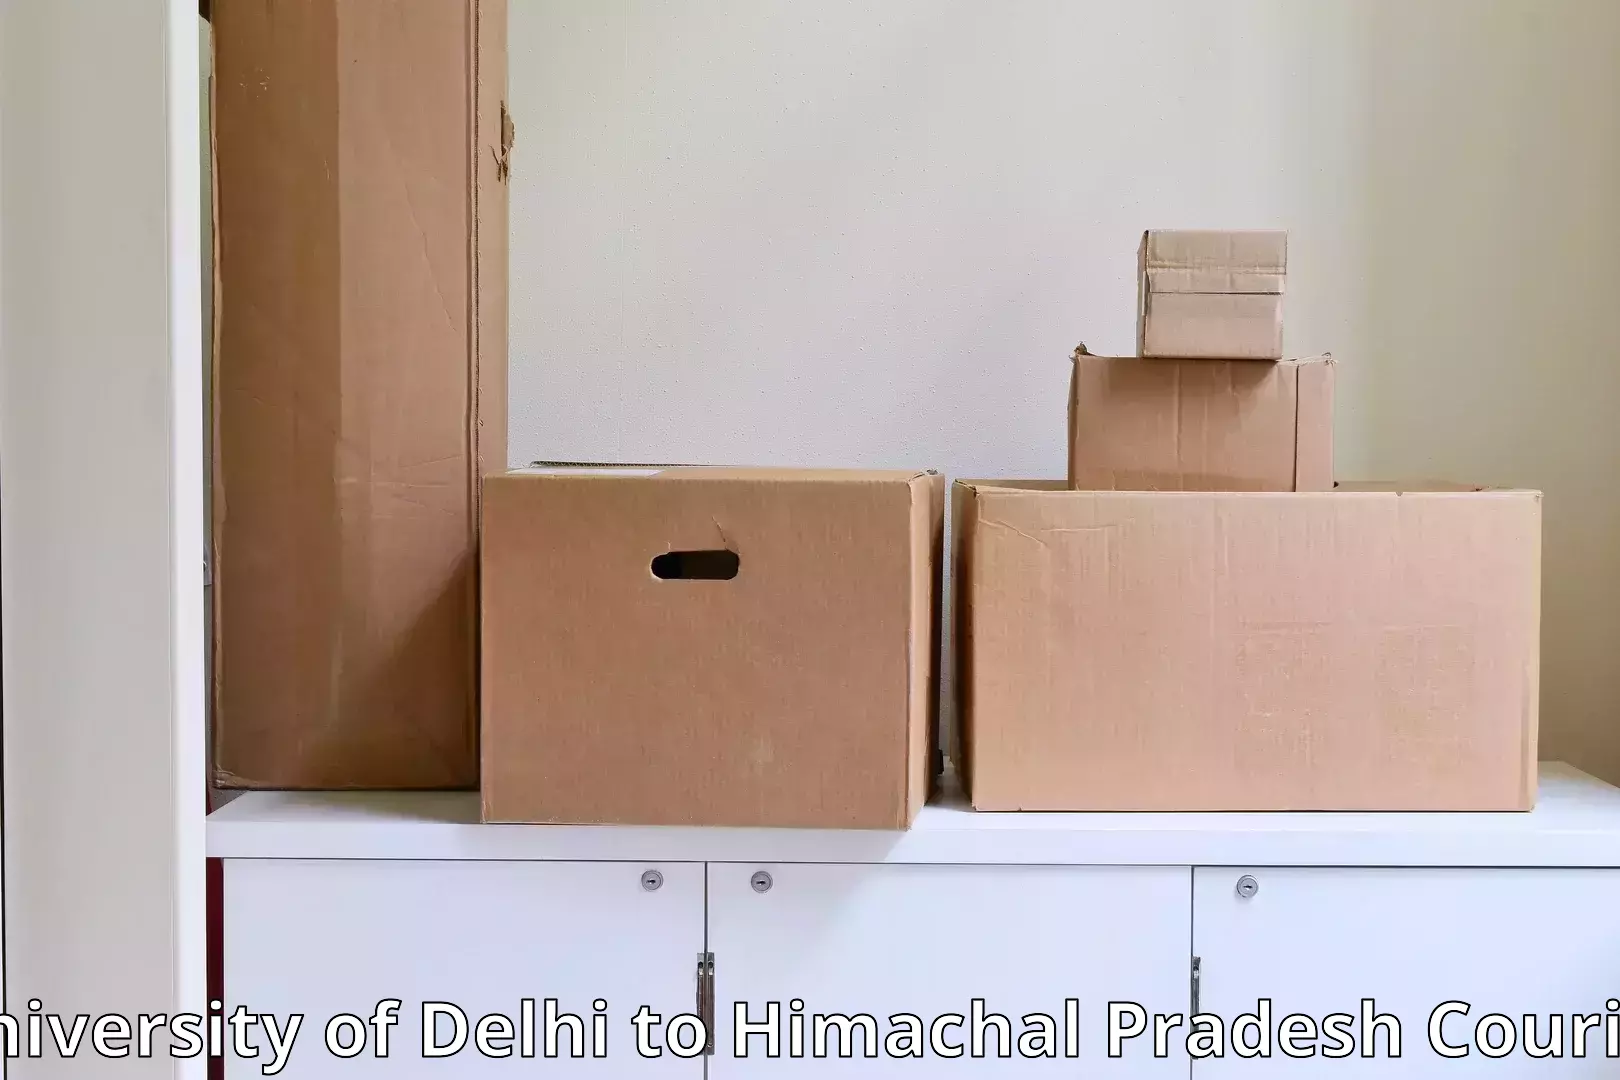 Professional moving assistance University of Delhi to Dalhousie